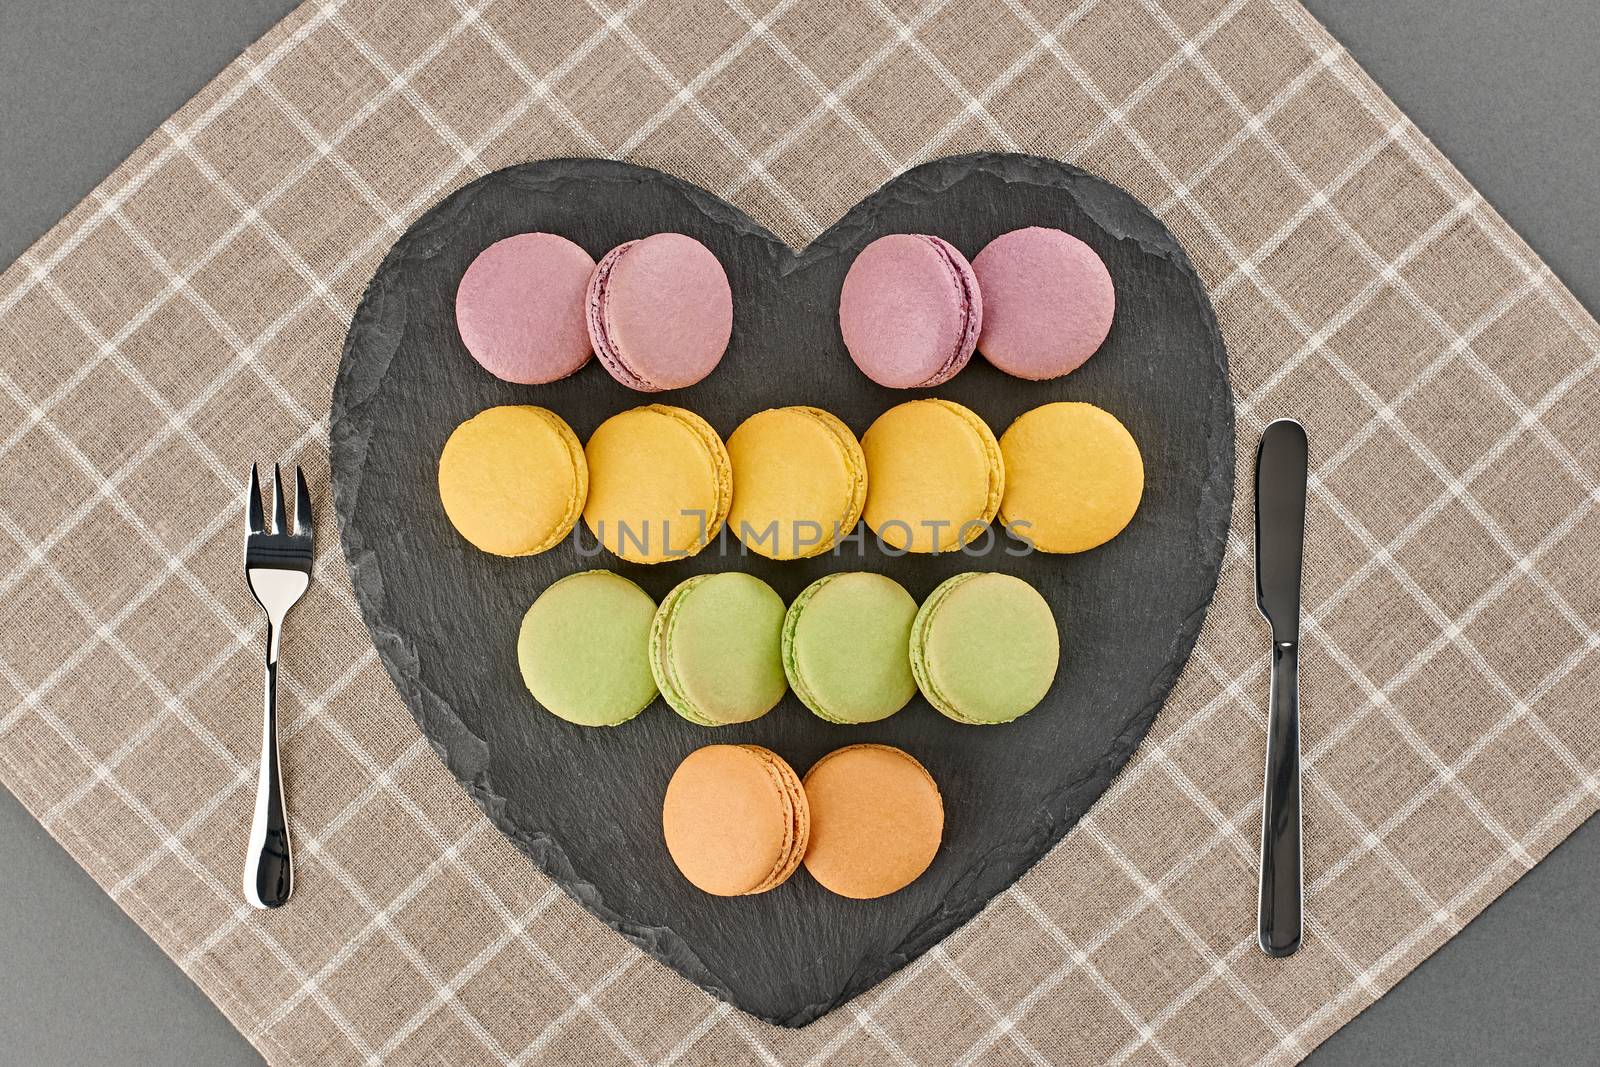 Still life, macarons, heart shape. Table setting by 918